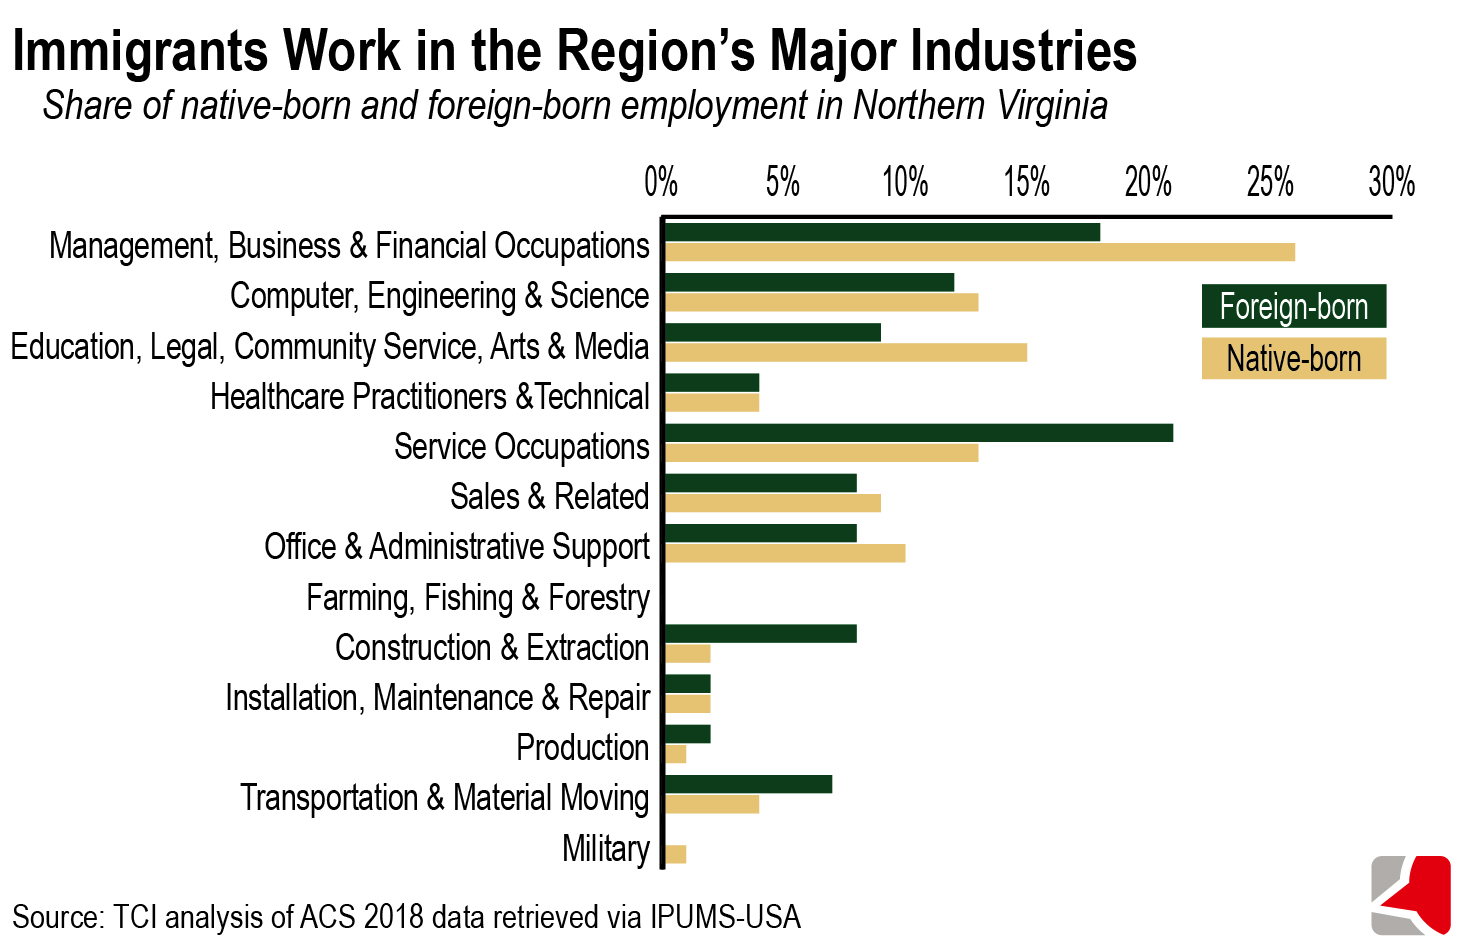 Bar growing showing the share of native-born and foreign-born employment by sector in Northern Virginia. Following service occupations at just over 20%, 18% of foreign-born immigrants work in management, business, and financial occupations, 12% in computer, engineering, and science occupations, and 9% in education, arts, and media occupations, based on analysis of ACS 2018 data via IPUMS-USA